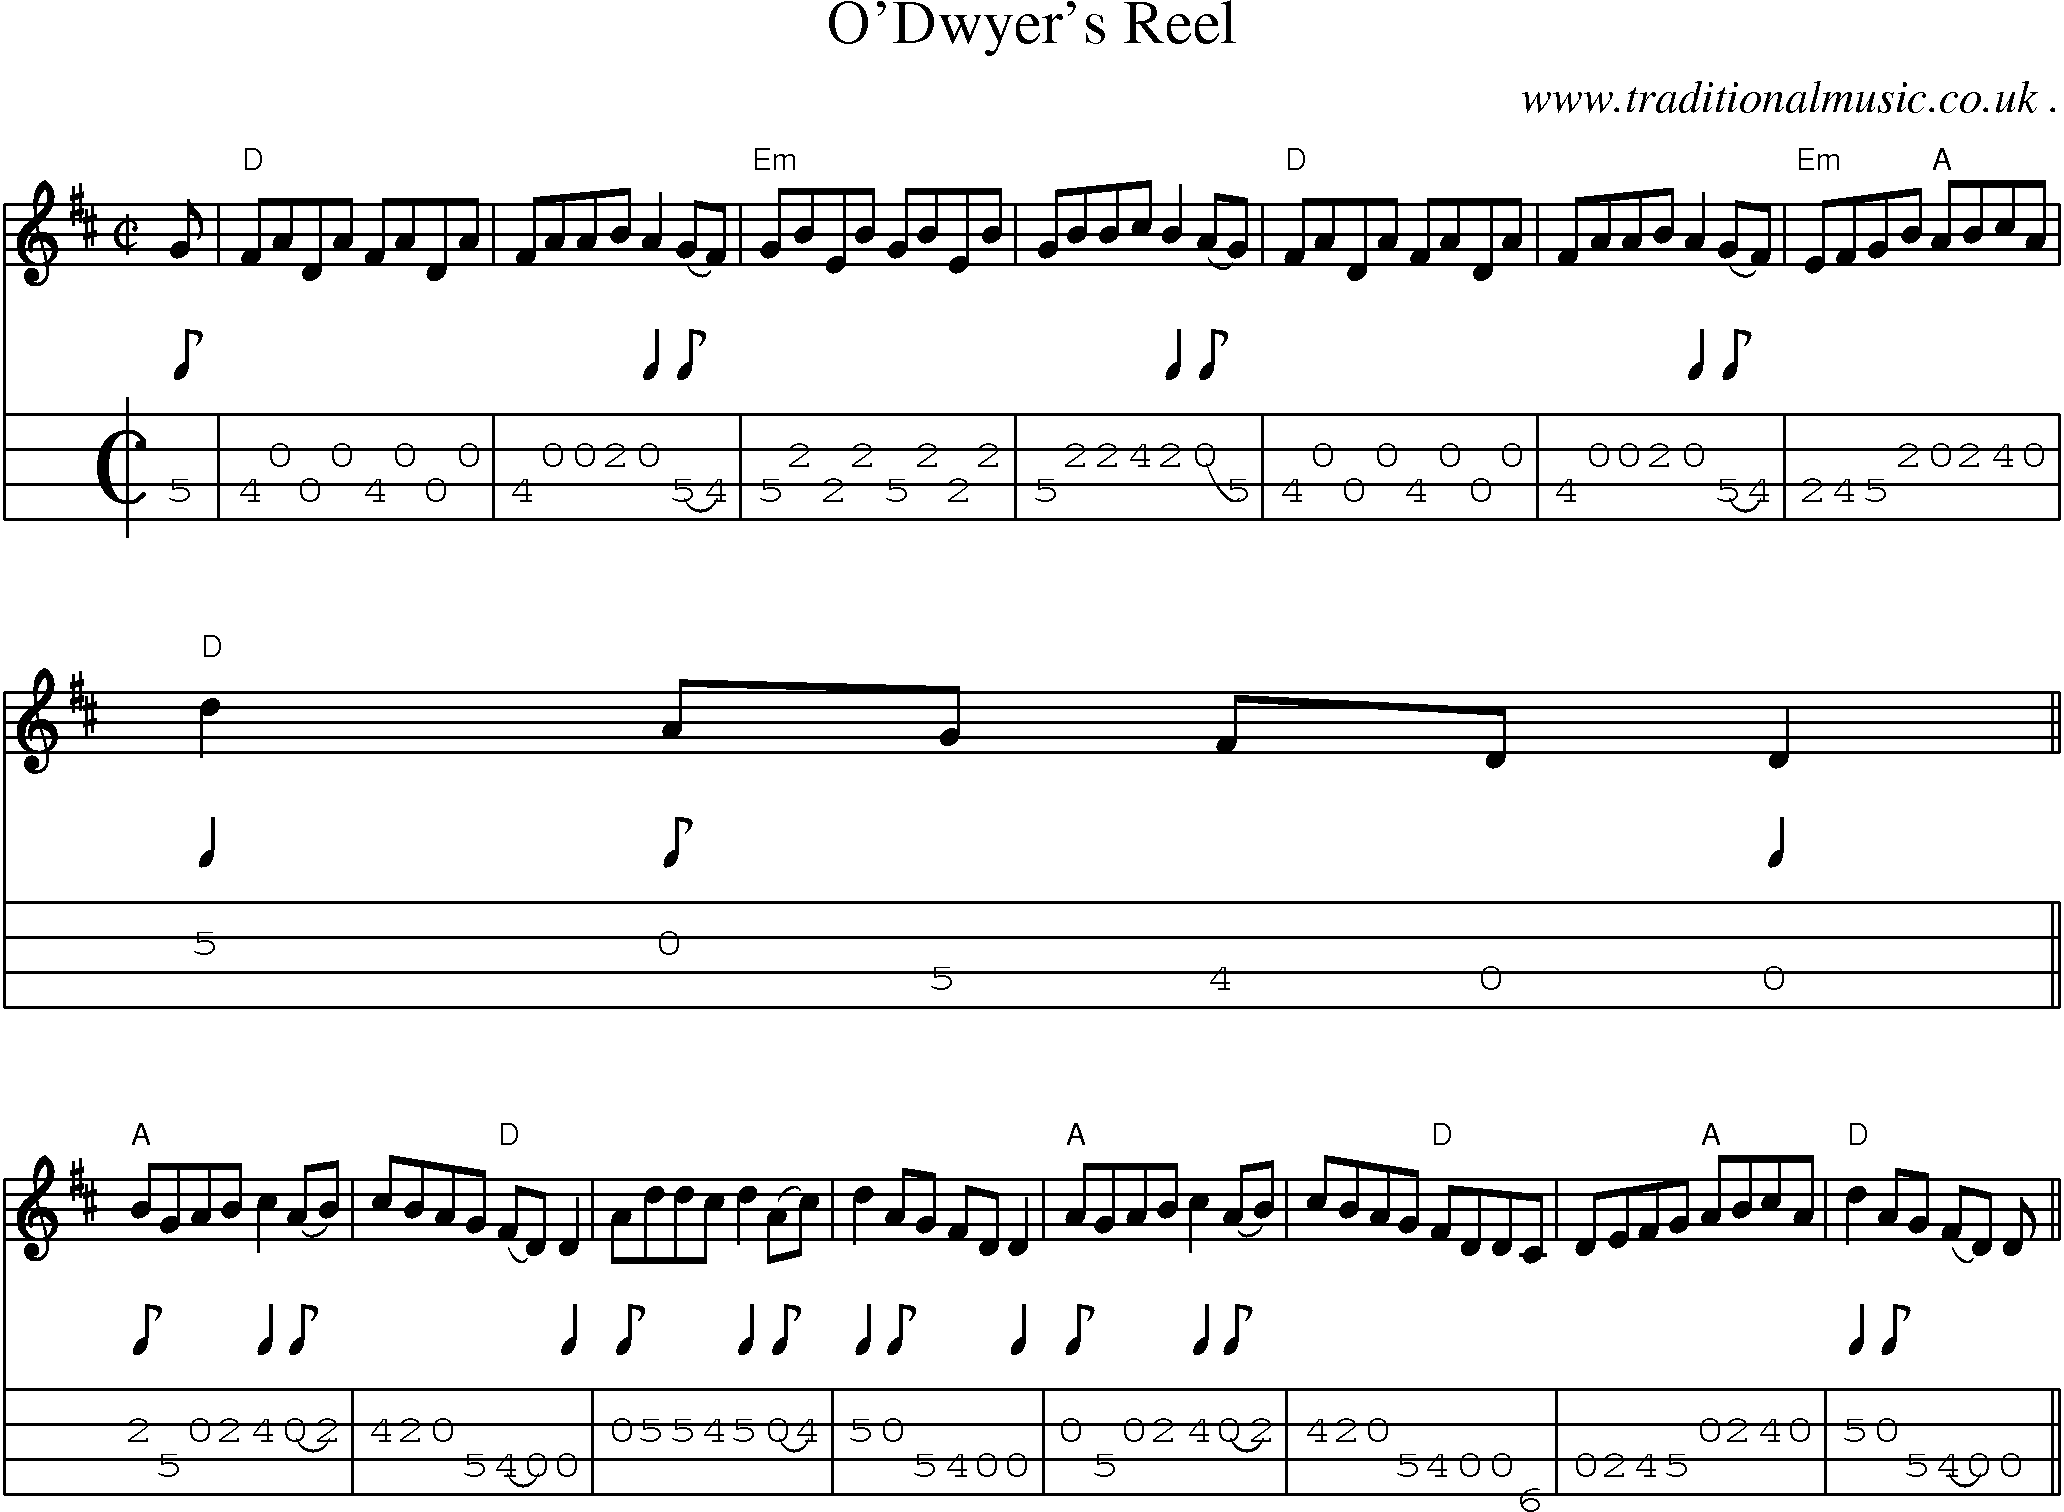 Music Score and Guitar Tabs for Odwyers Reel